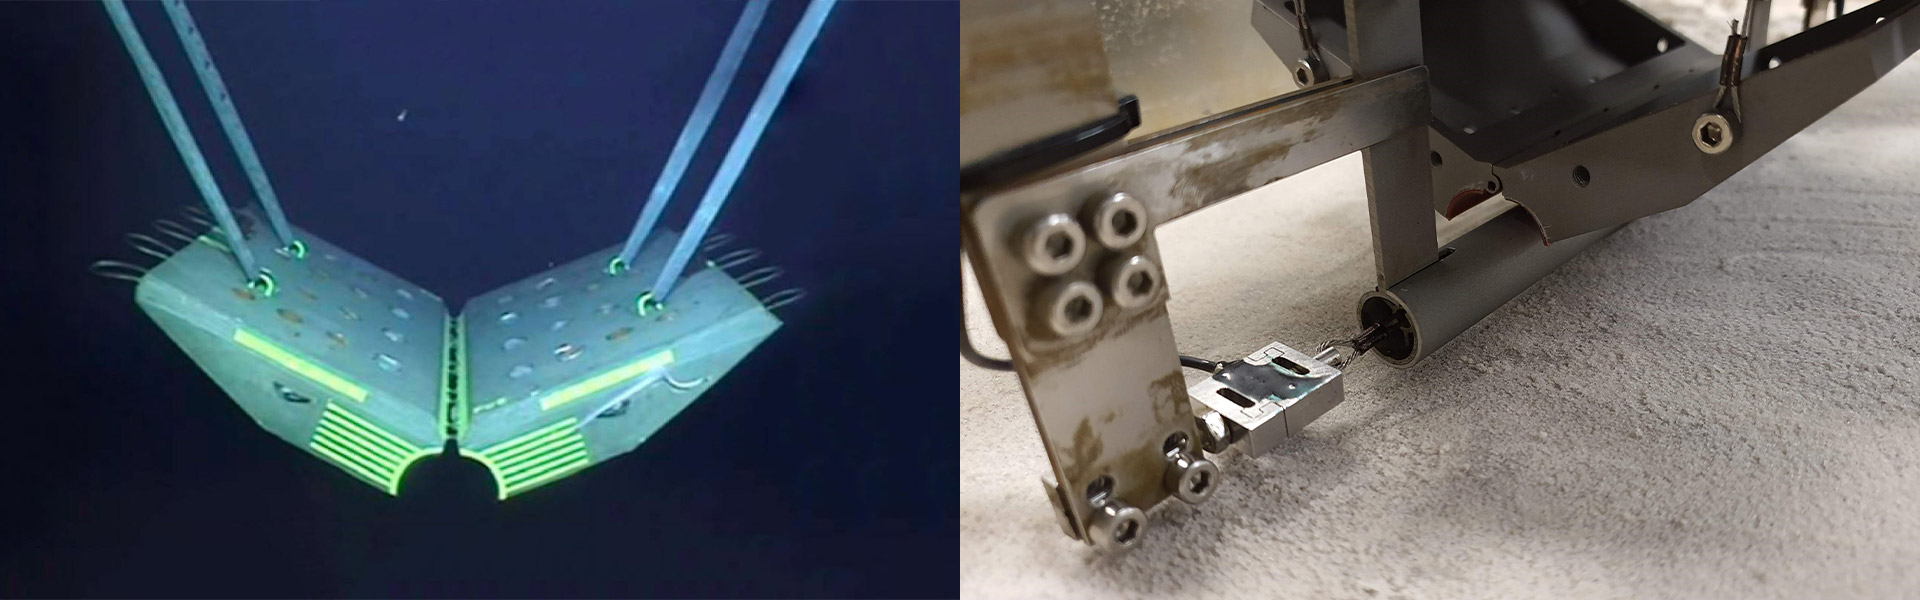 PCM being lowered onto an offshore pipeline to keep it stable (left) (Frankenmolen et al 2017), and onto a model pipeline in the NGCF centrifuge experiments (right)